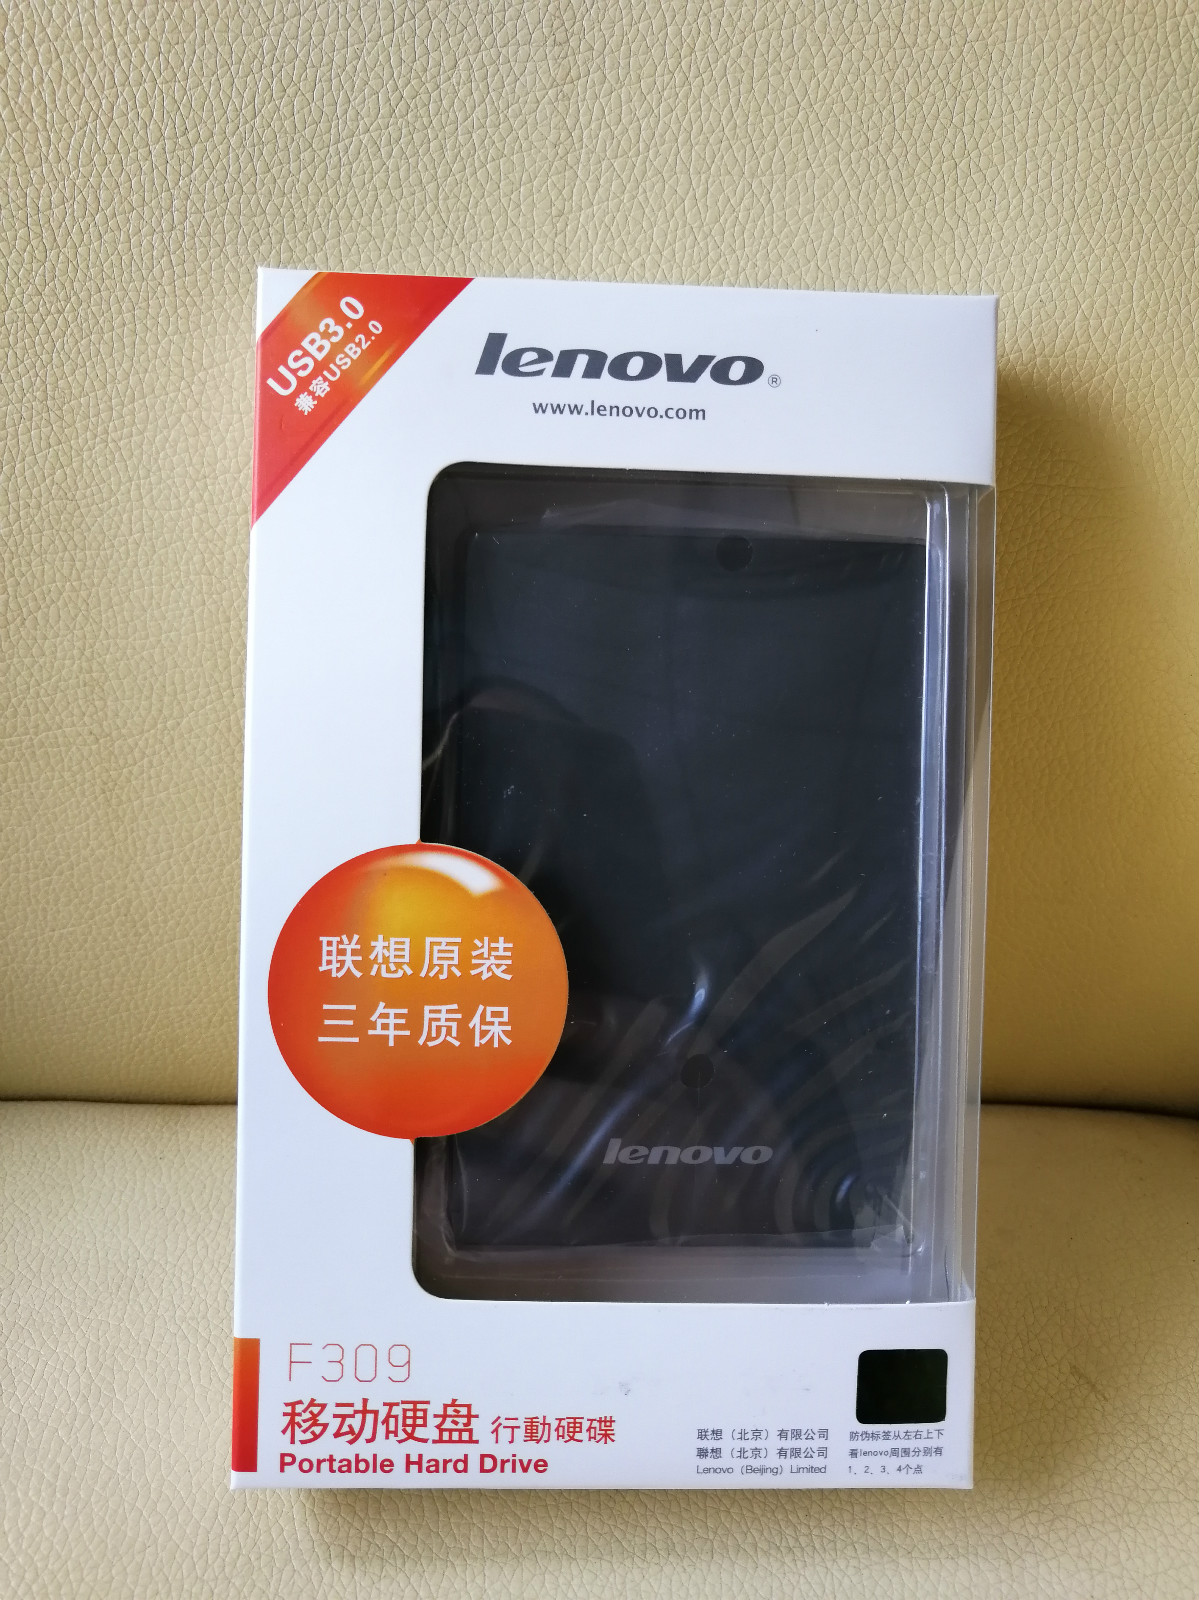 Lenovo F308 Mobile Hard Disk 1T USB3.0 High Speed, Compact and Portable 1TB Mobile Hard Disk